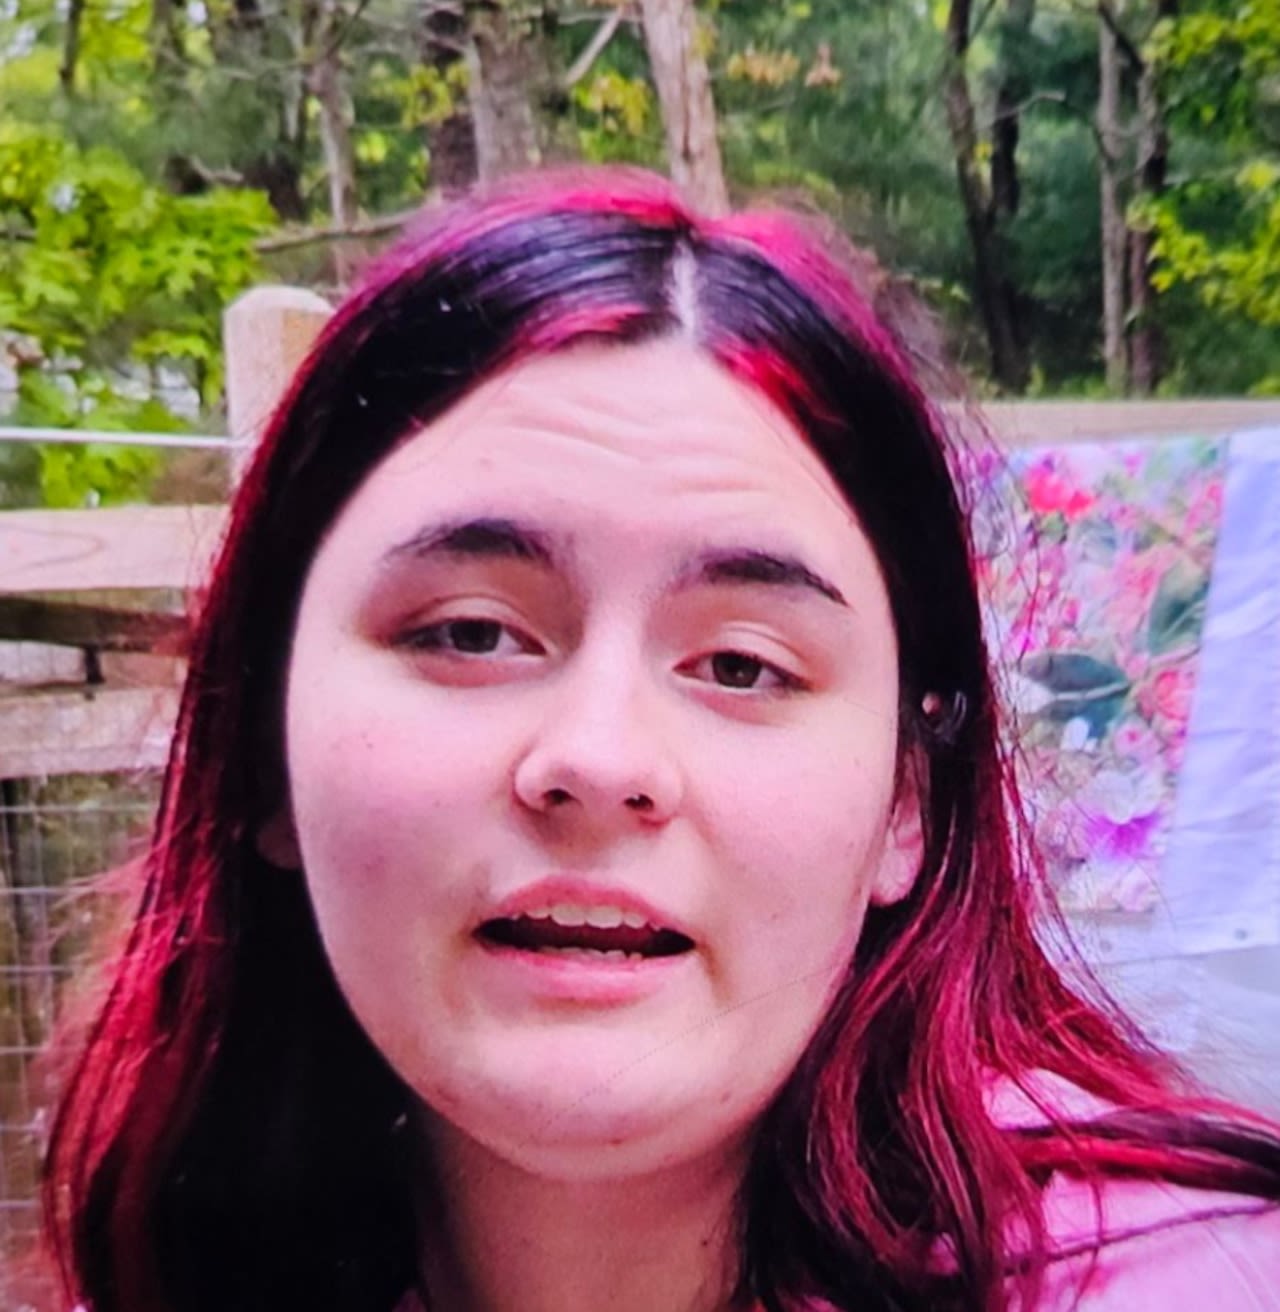 15-year-old missing in Mass. believed to be in danger